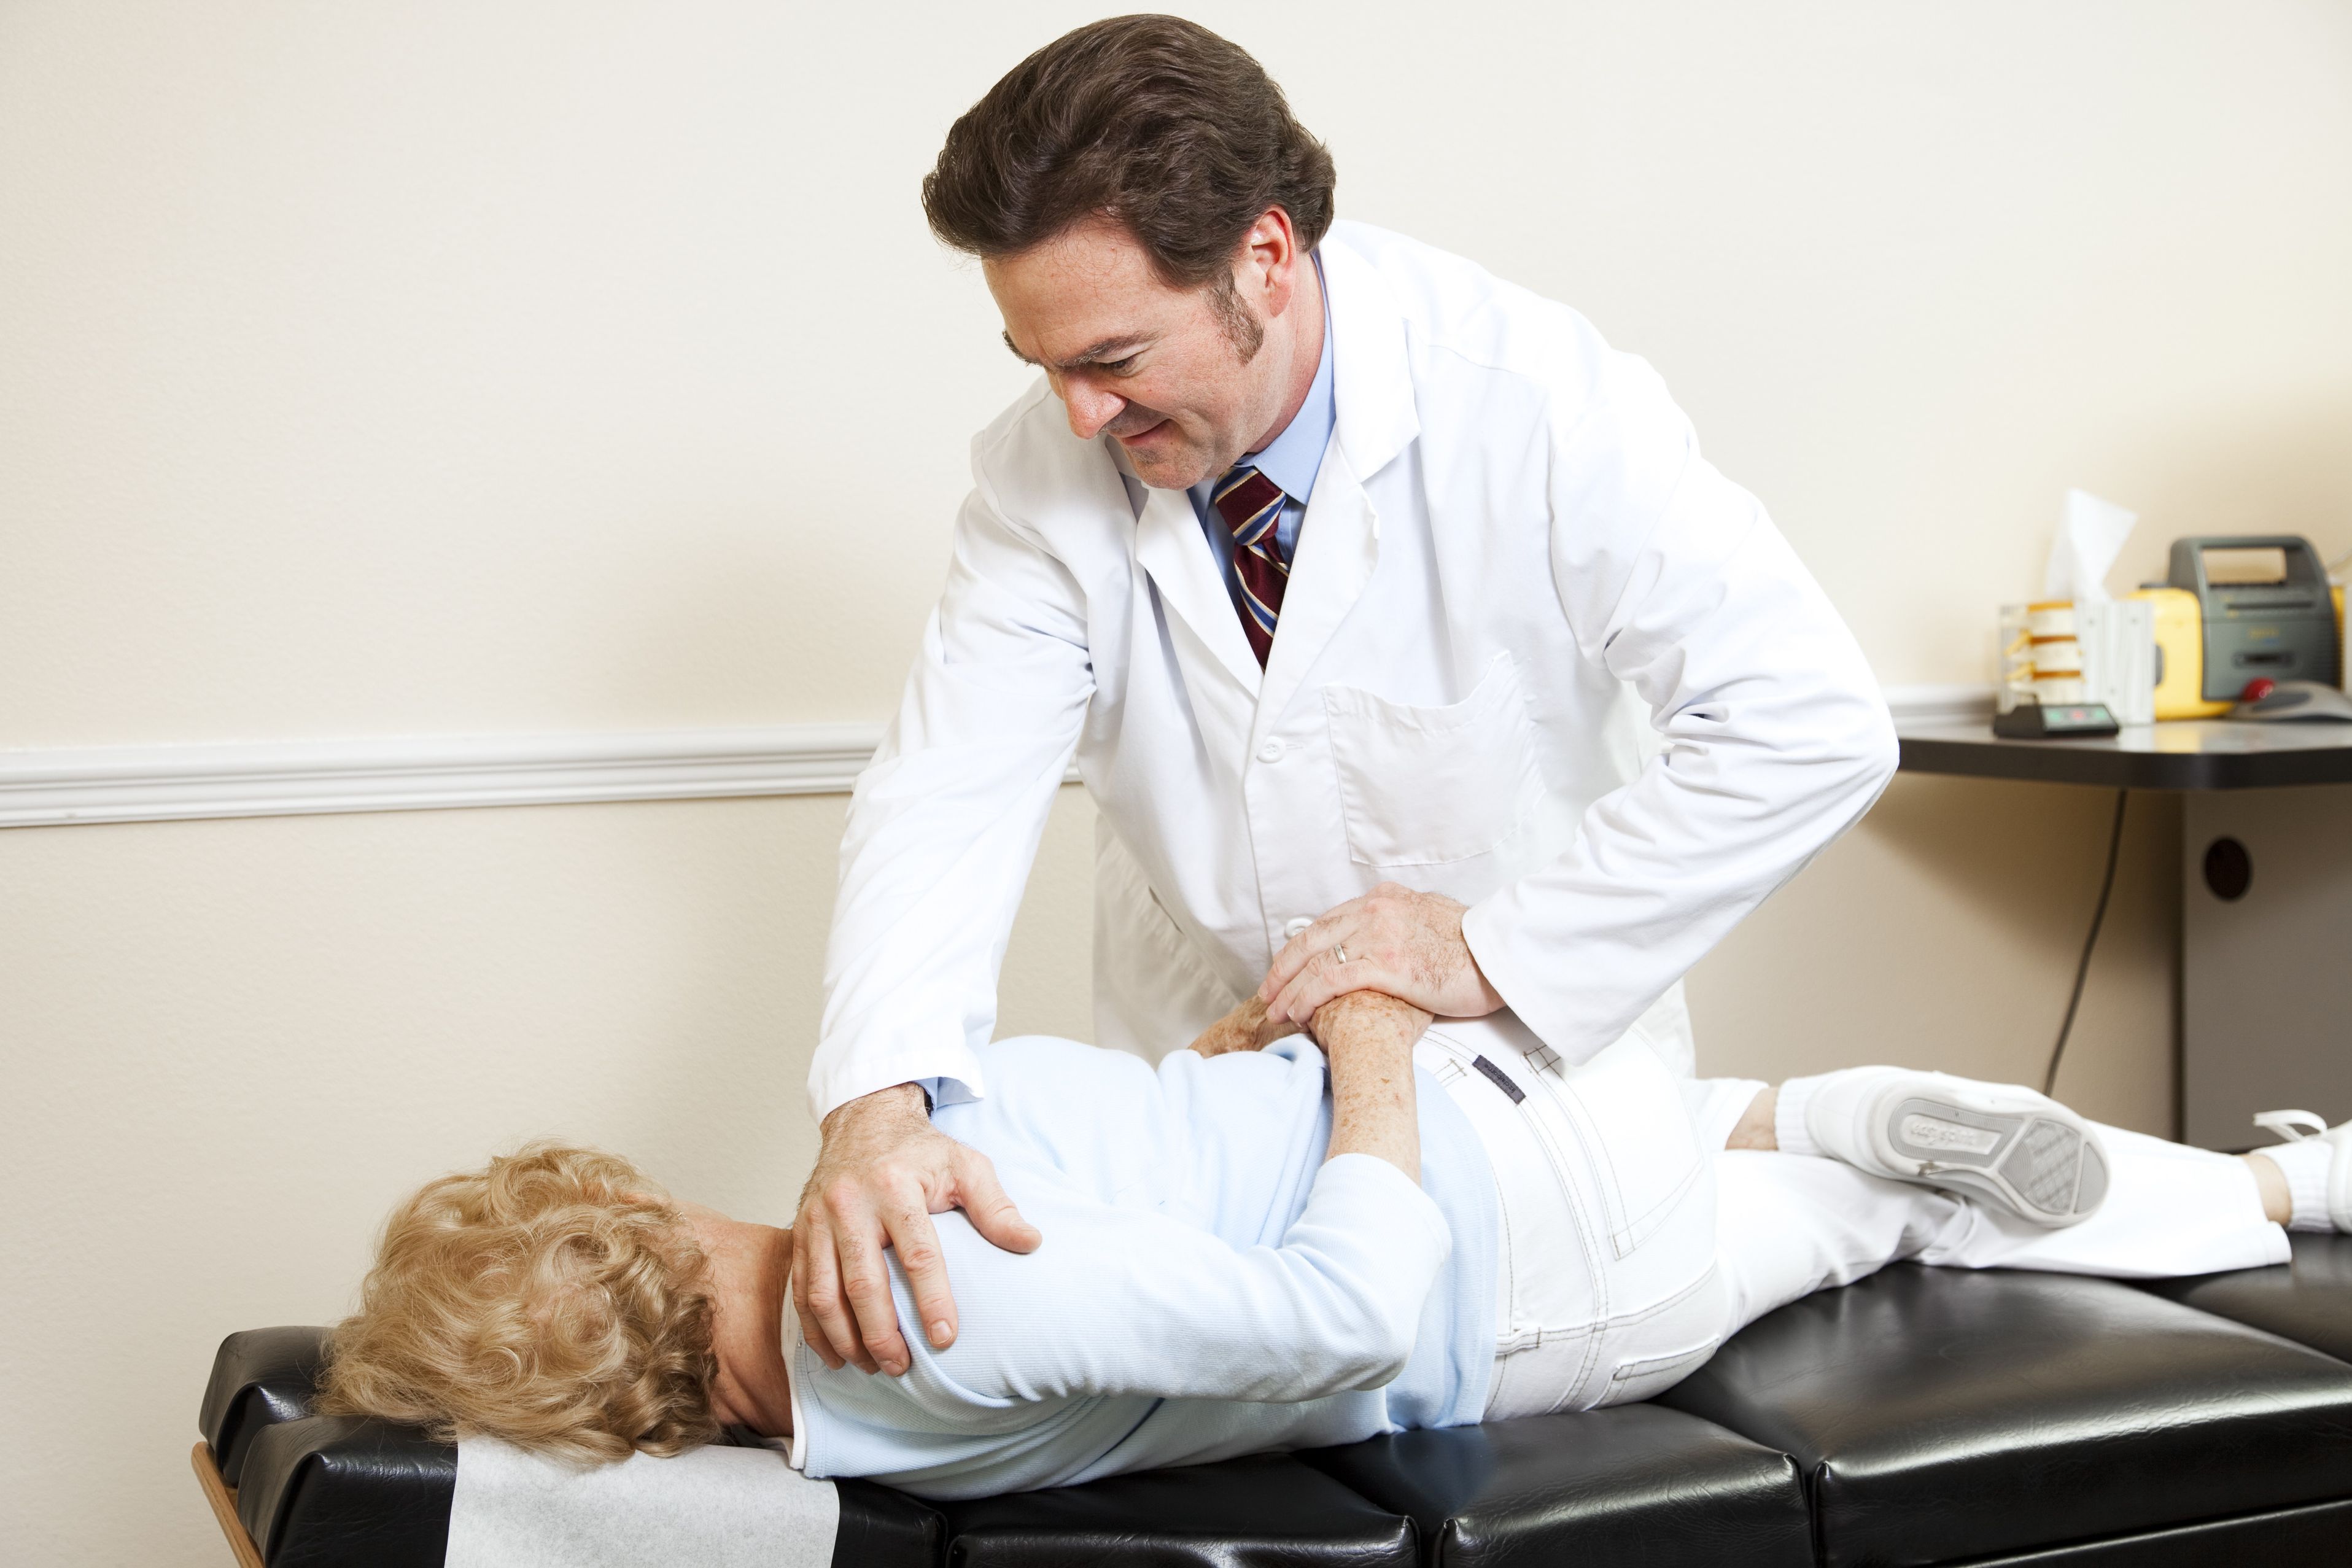 Good Orthopedic Doctors in Panama City, FL Can Help You Feel Like Yourself Again Quickly